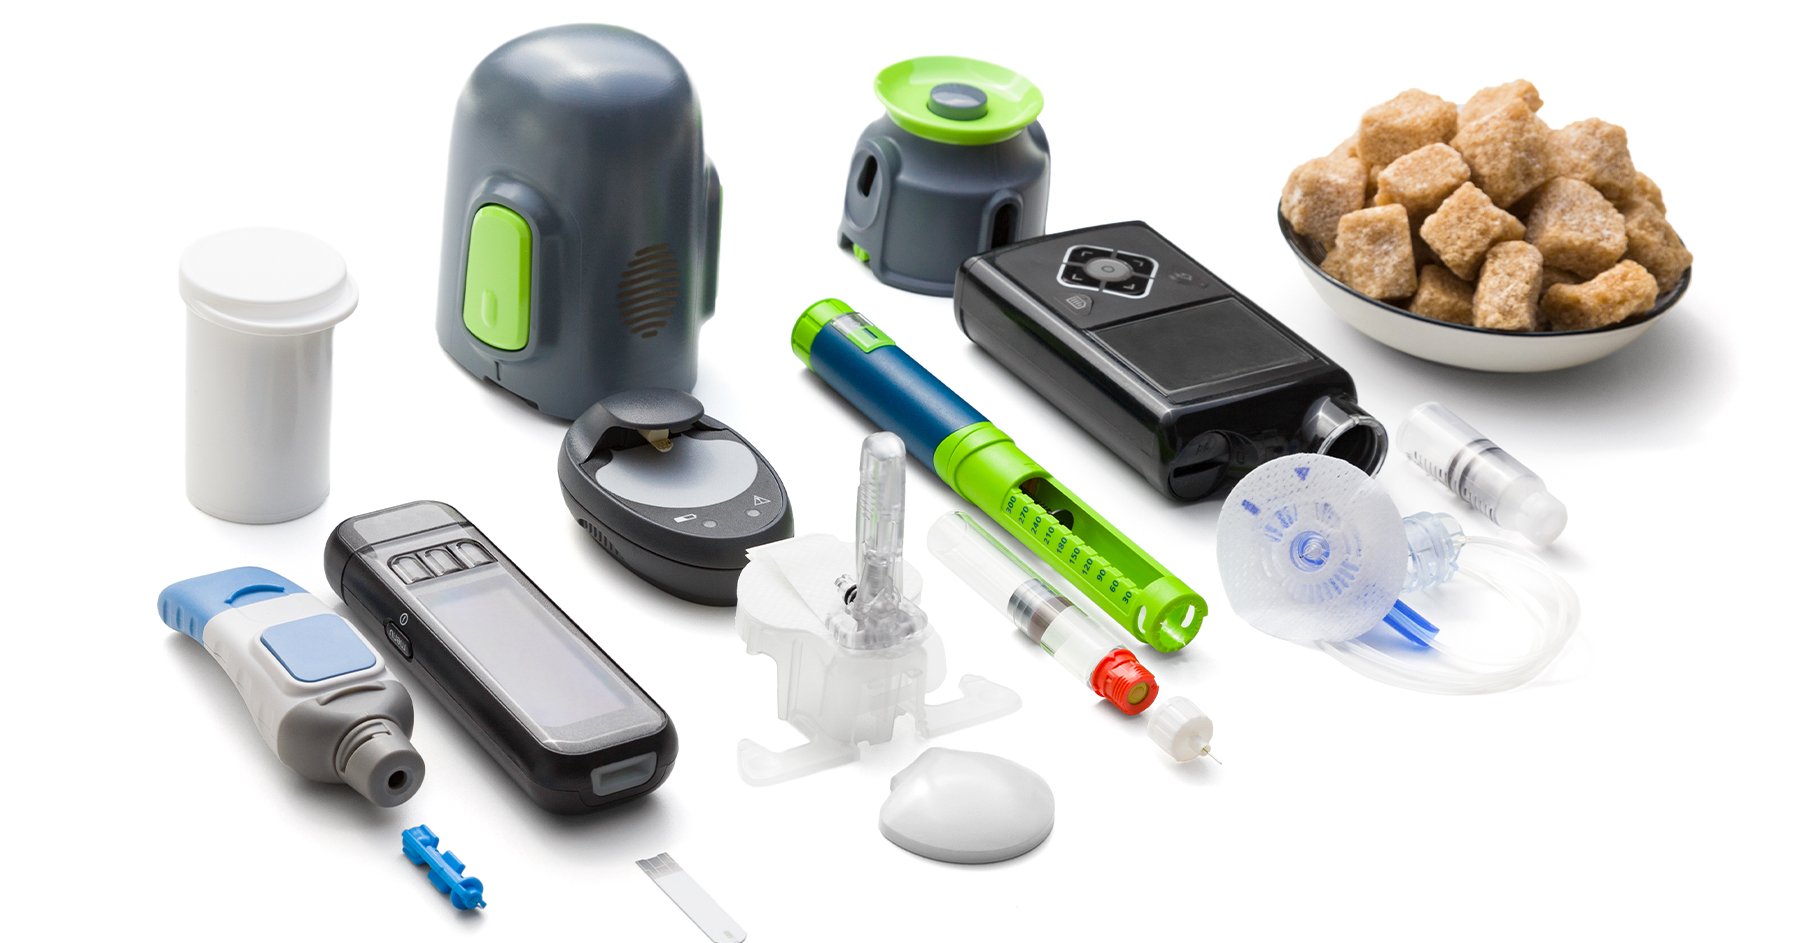 Diabetes Technology: The Latest Advances in Glucose Monitoring and Insulin Delivery